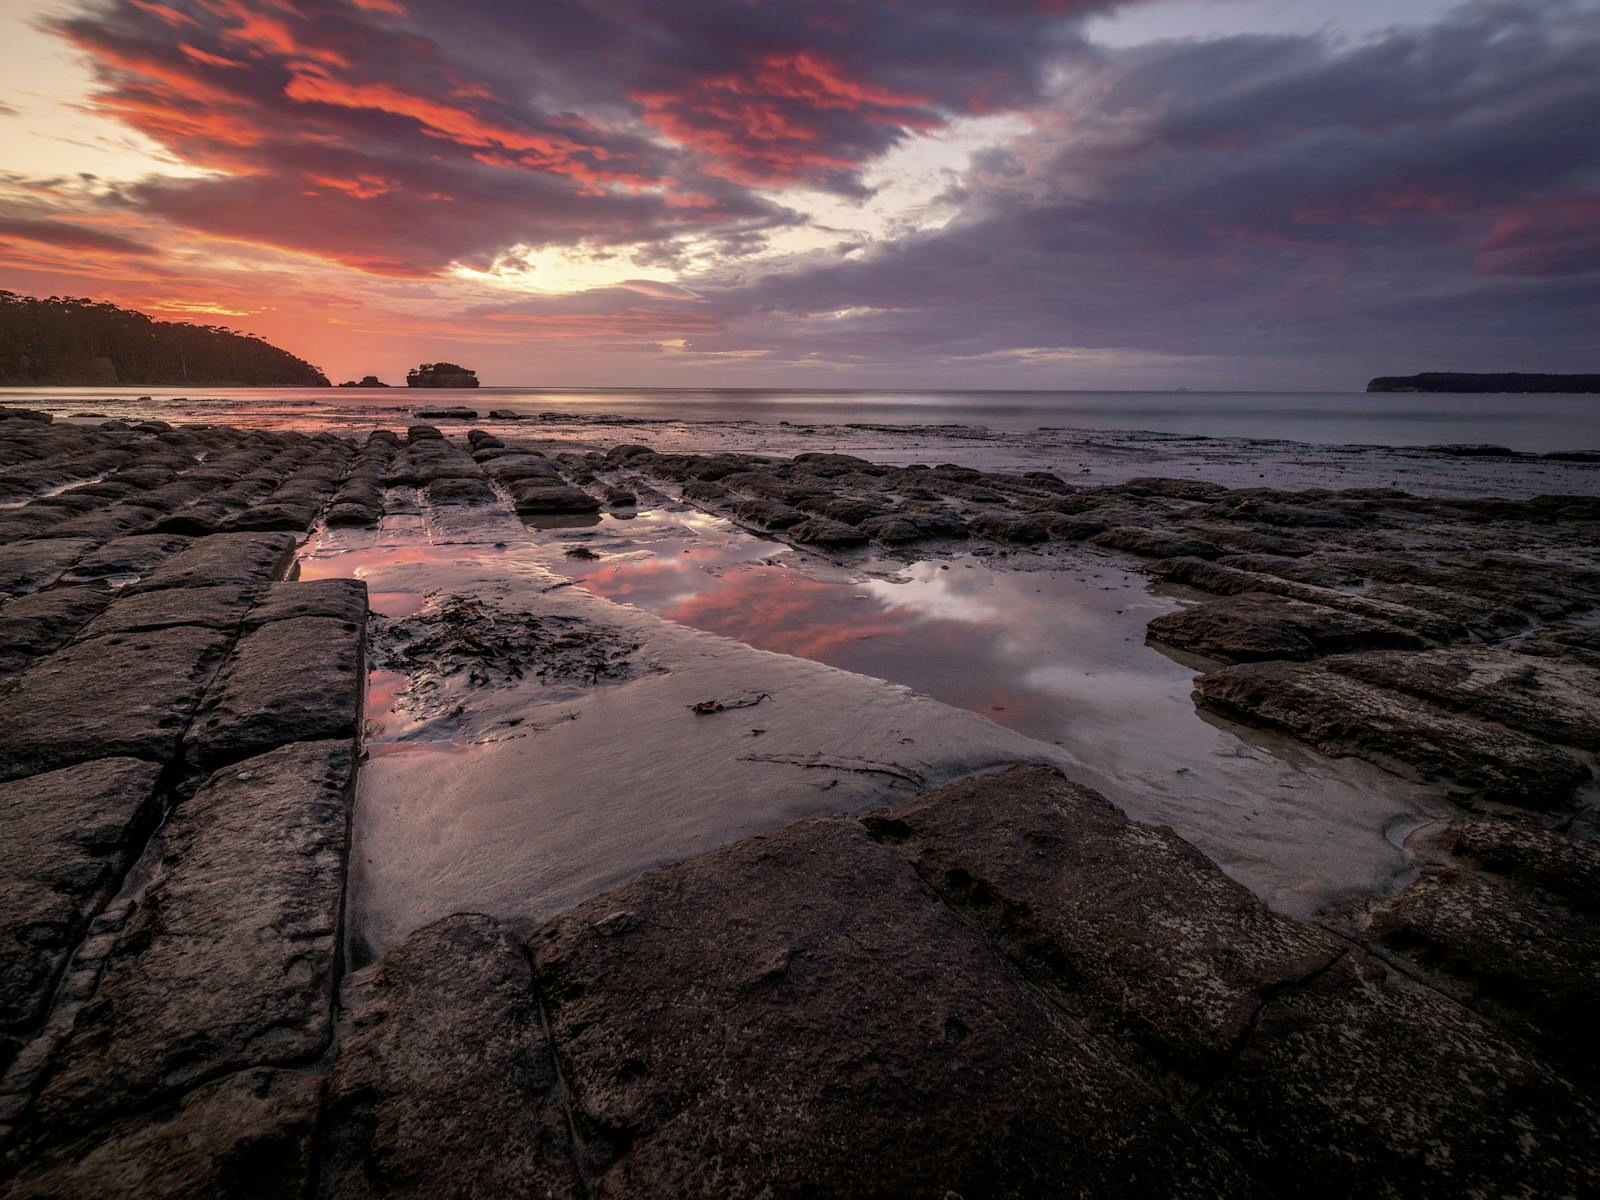 Sunrise at the Tessellated Pavement is a highlight of the 3 day Tasman Peninsula photography tour